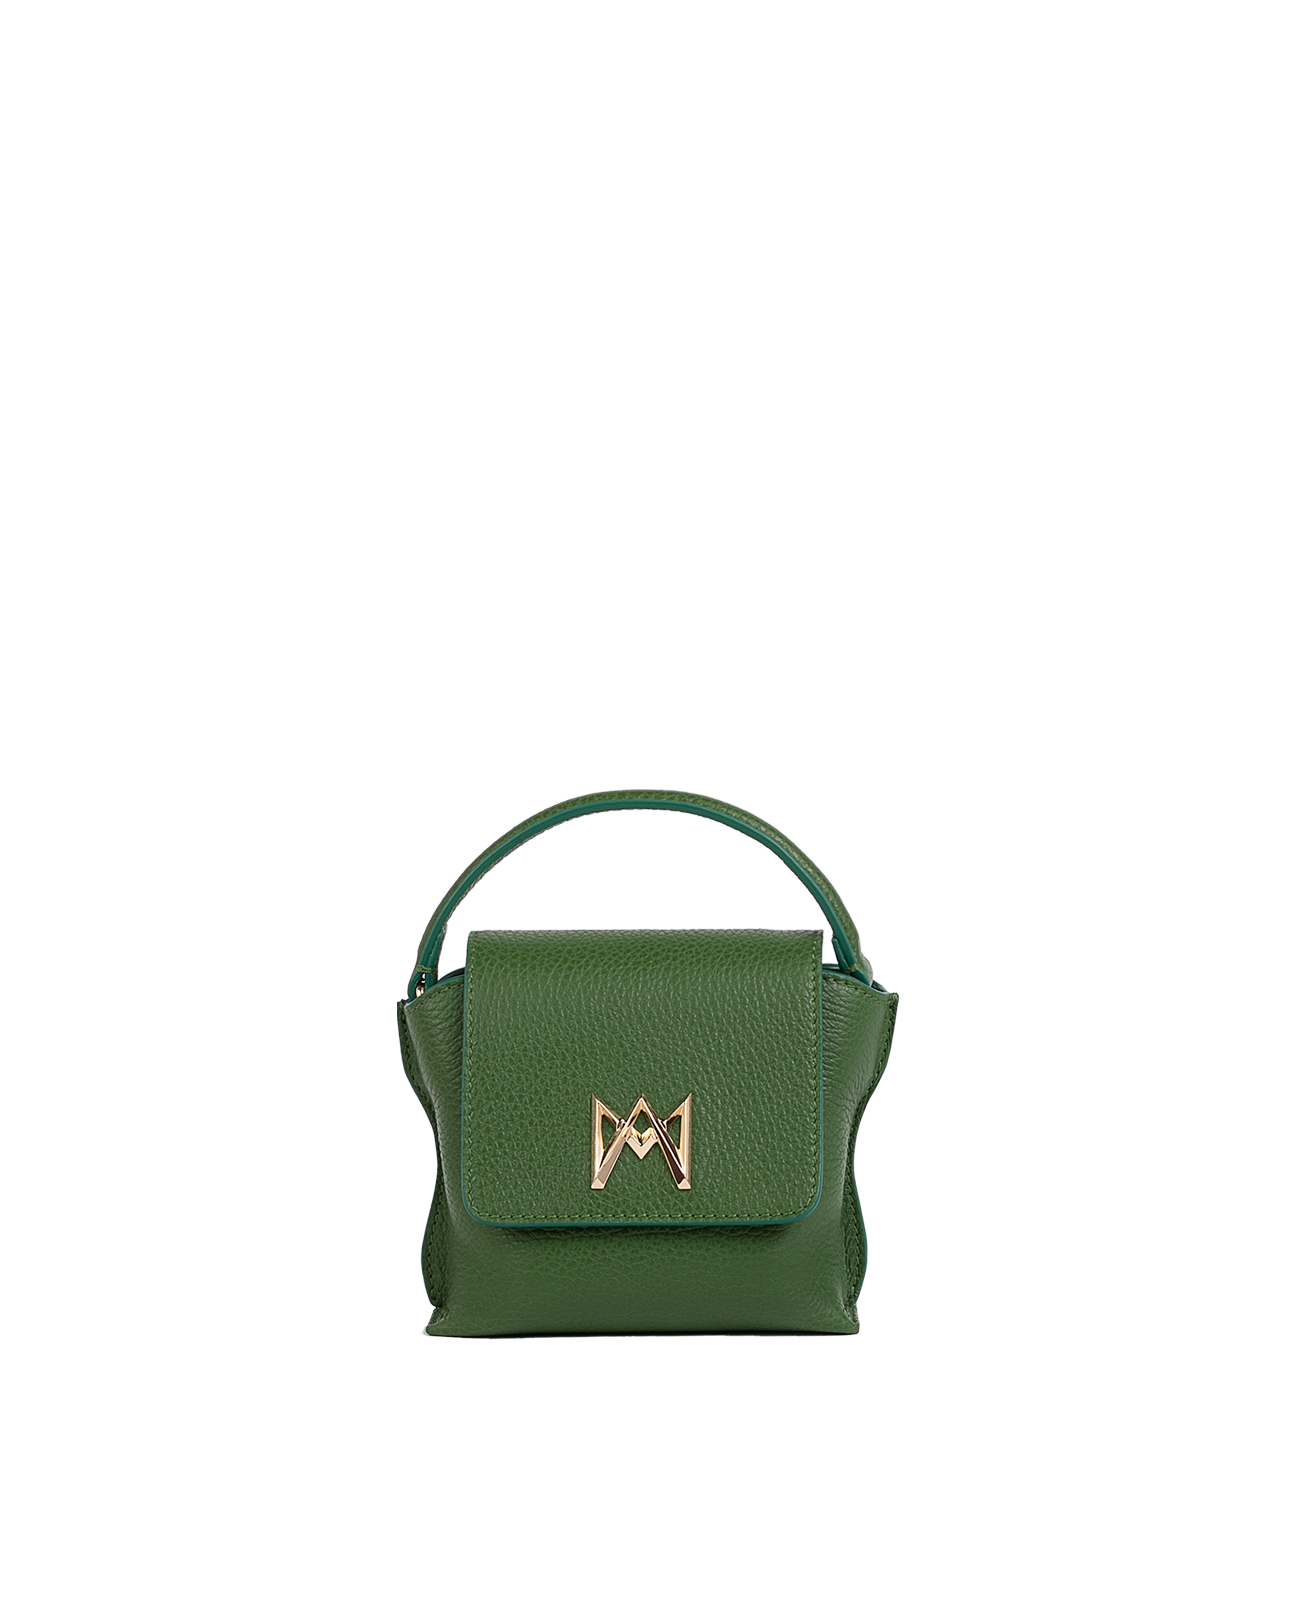 Cross-body bag in Italian full-grain leather, semi-aniline calf Italian leather with detachable shoulder strap.Three compartments, zip pocket in the back compartment. Magnetic flap closure with logo. Color: Green. Size: Mini.